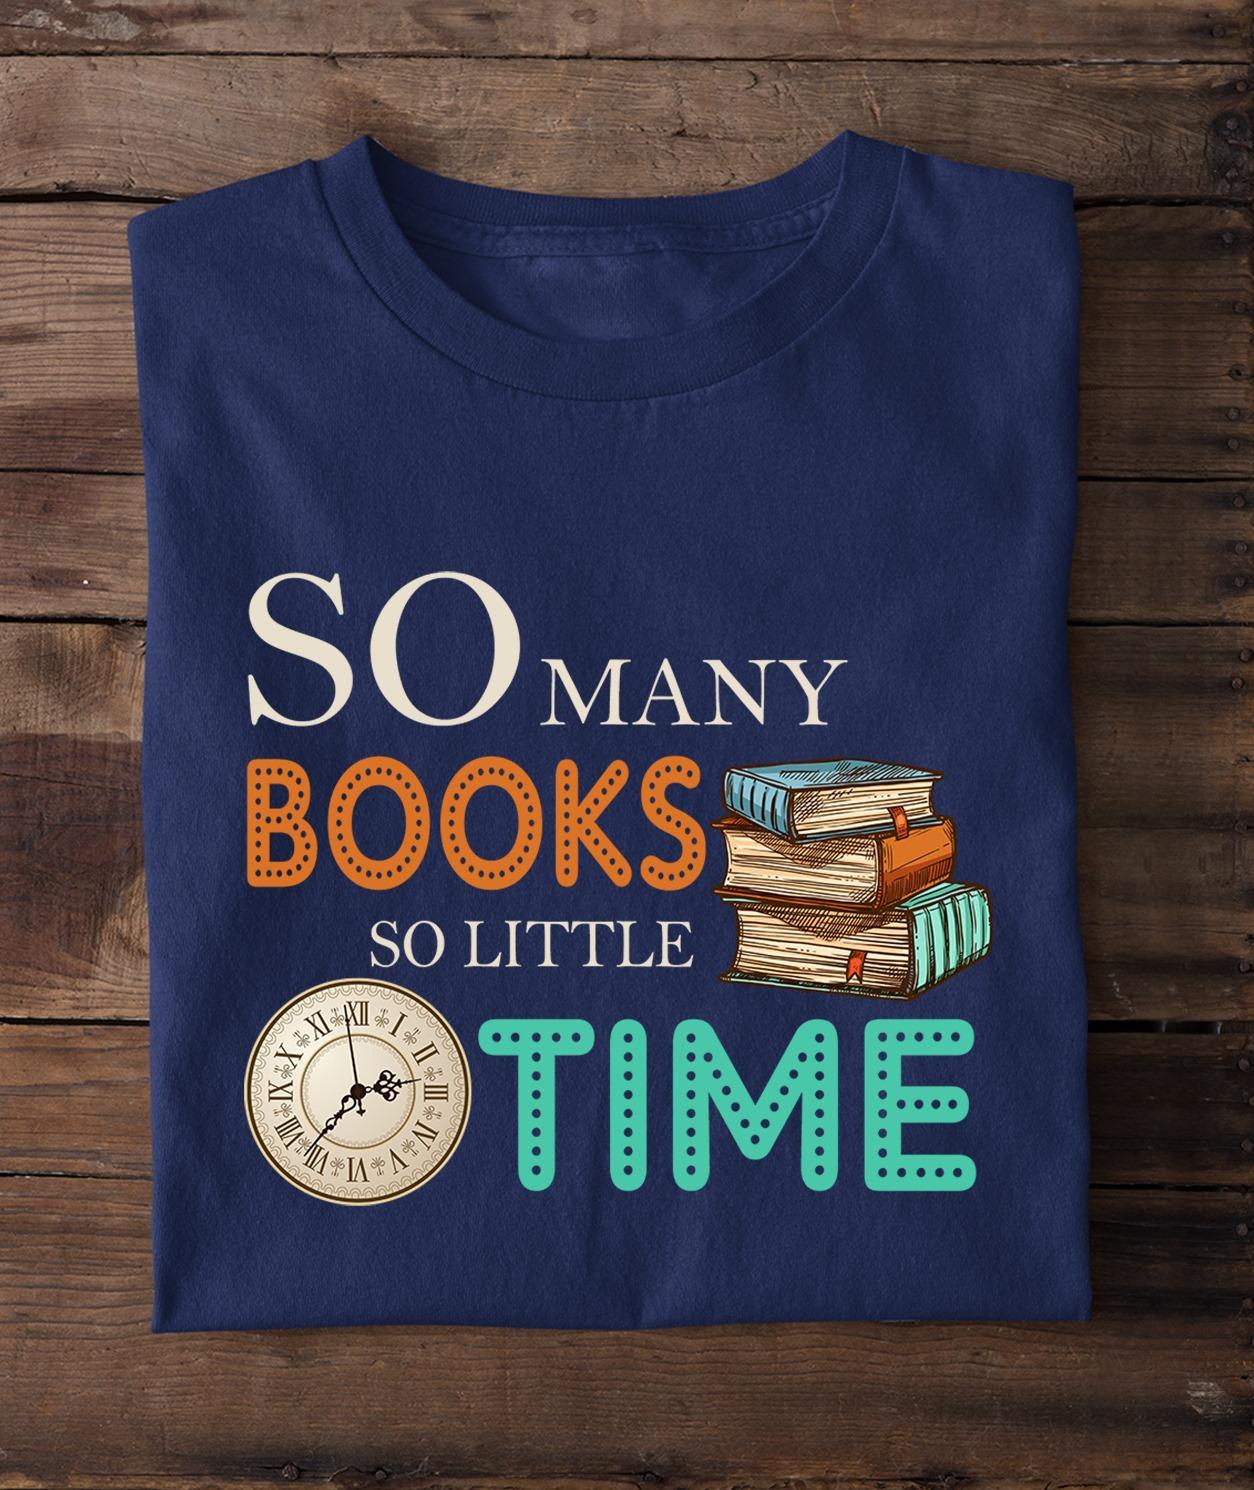 So many books so little time - Books and clock, gift for book reader